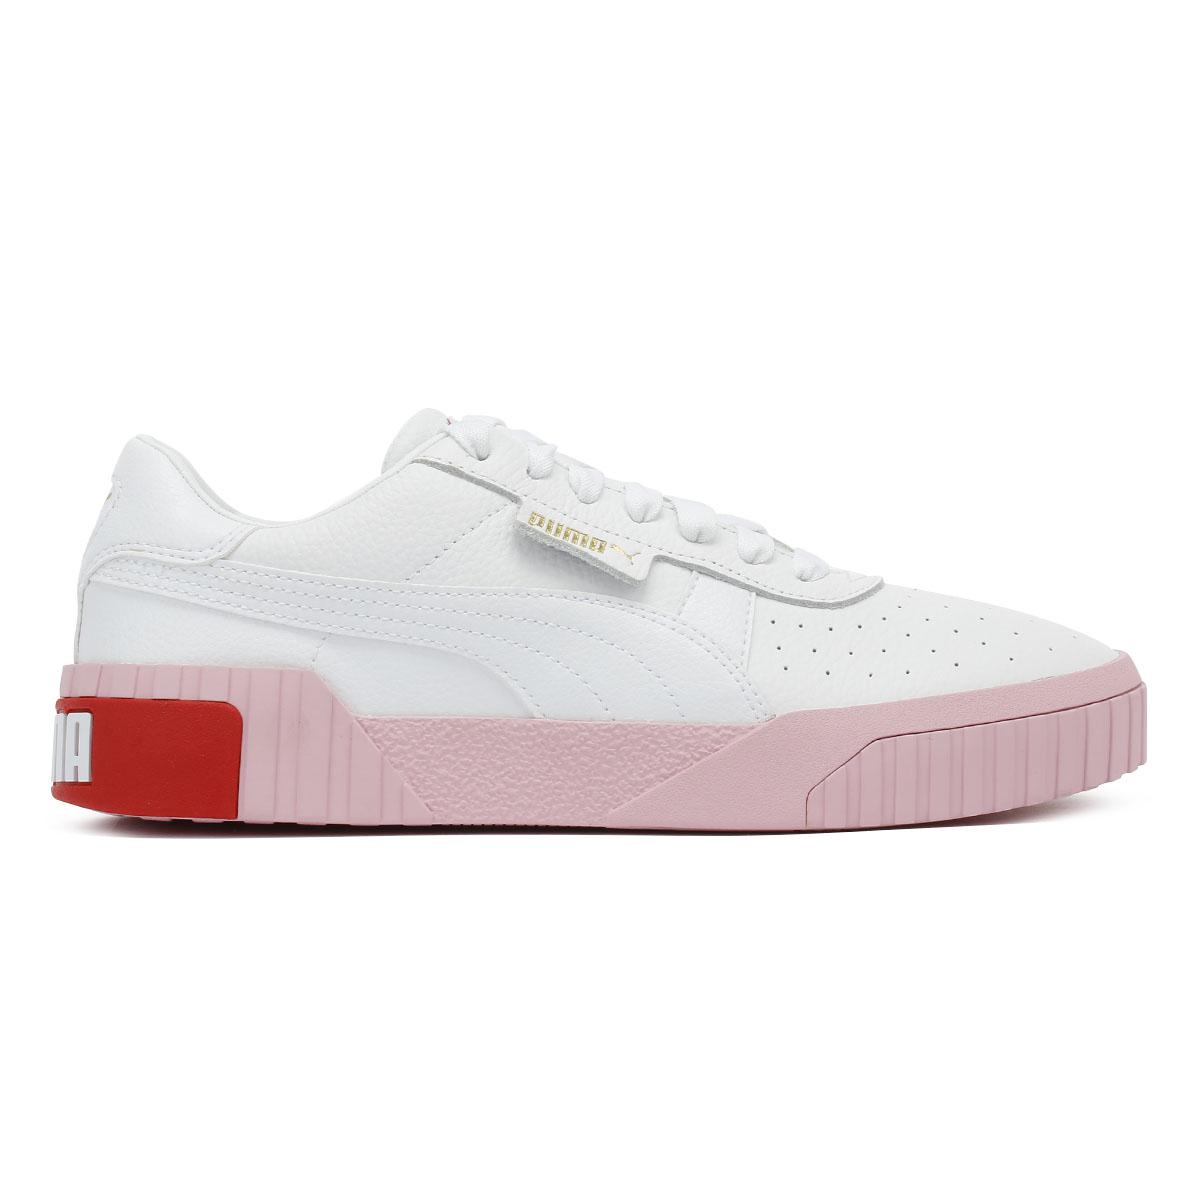 PUMA Rubber Cali Womens White / Pale Pink Trainers - Lyst